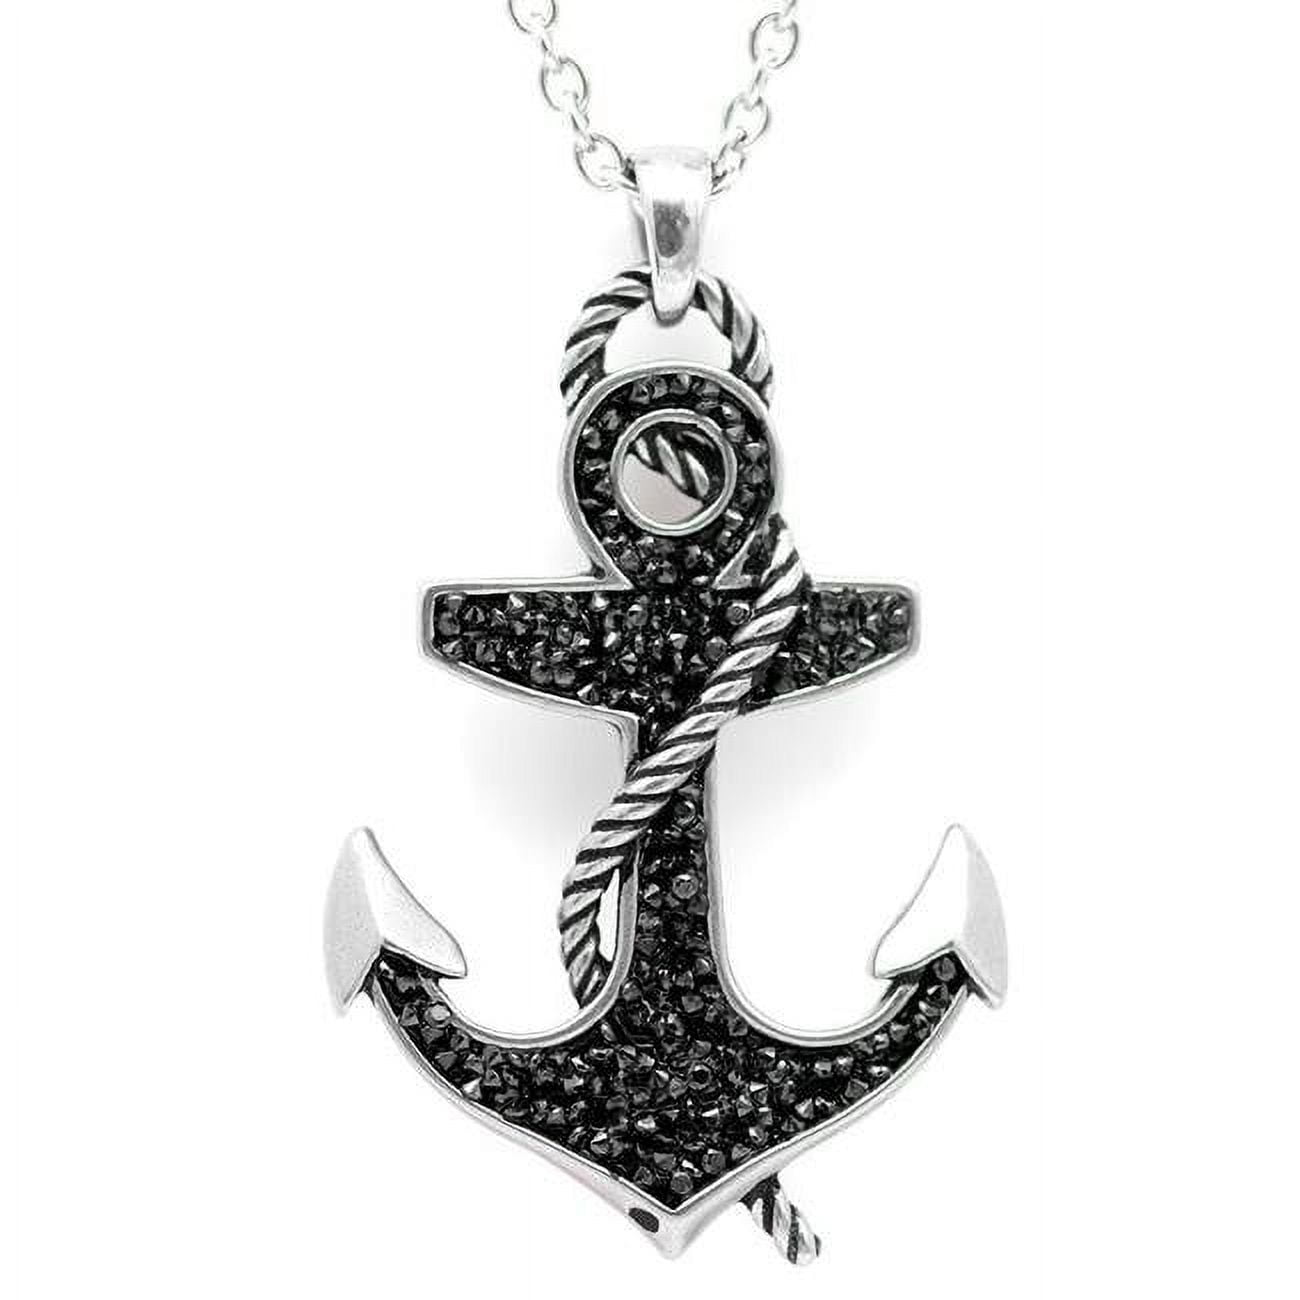 Cn099 Black Stoned Anchor Necklace